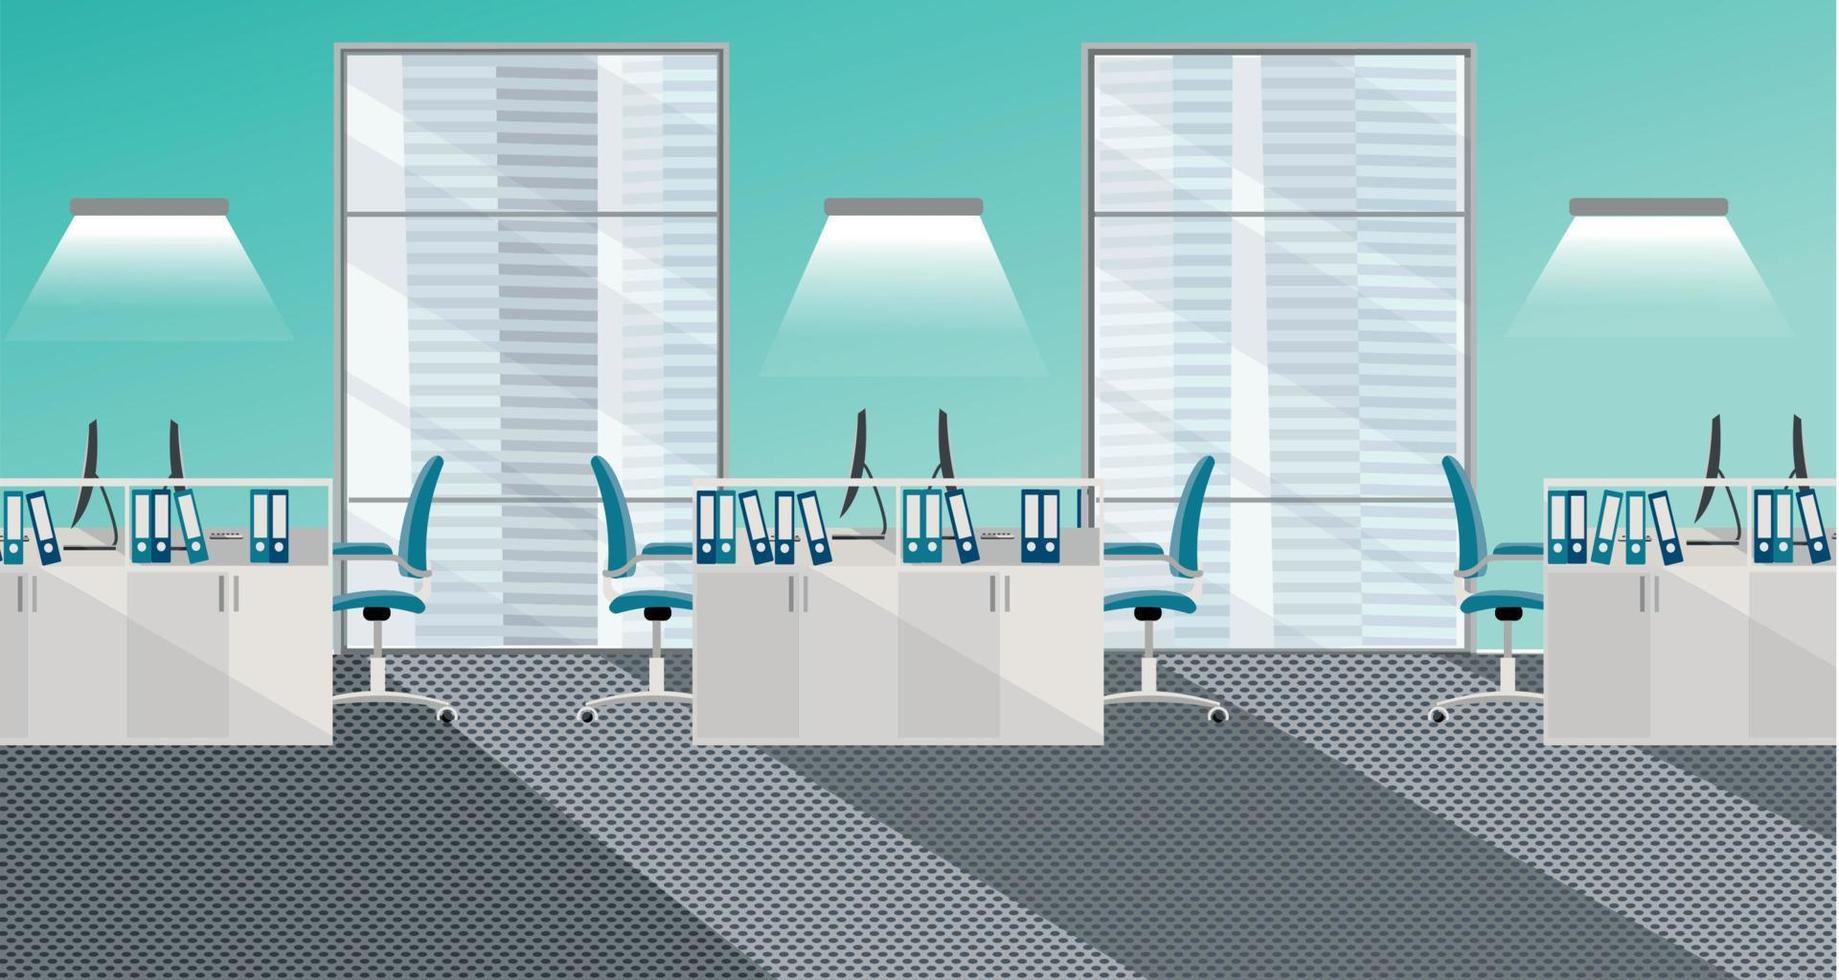 Flat vector illustration of modern office room interior with large windows in skyscraper with furniture and computers. Open space for 6 people. Order on tables, document folders, light from windows